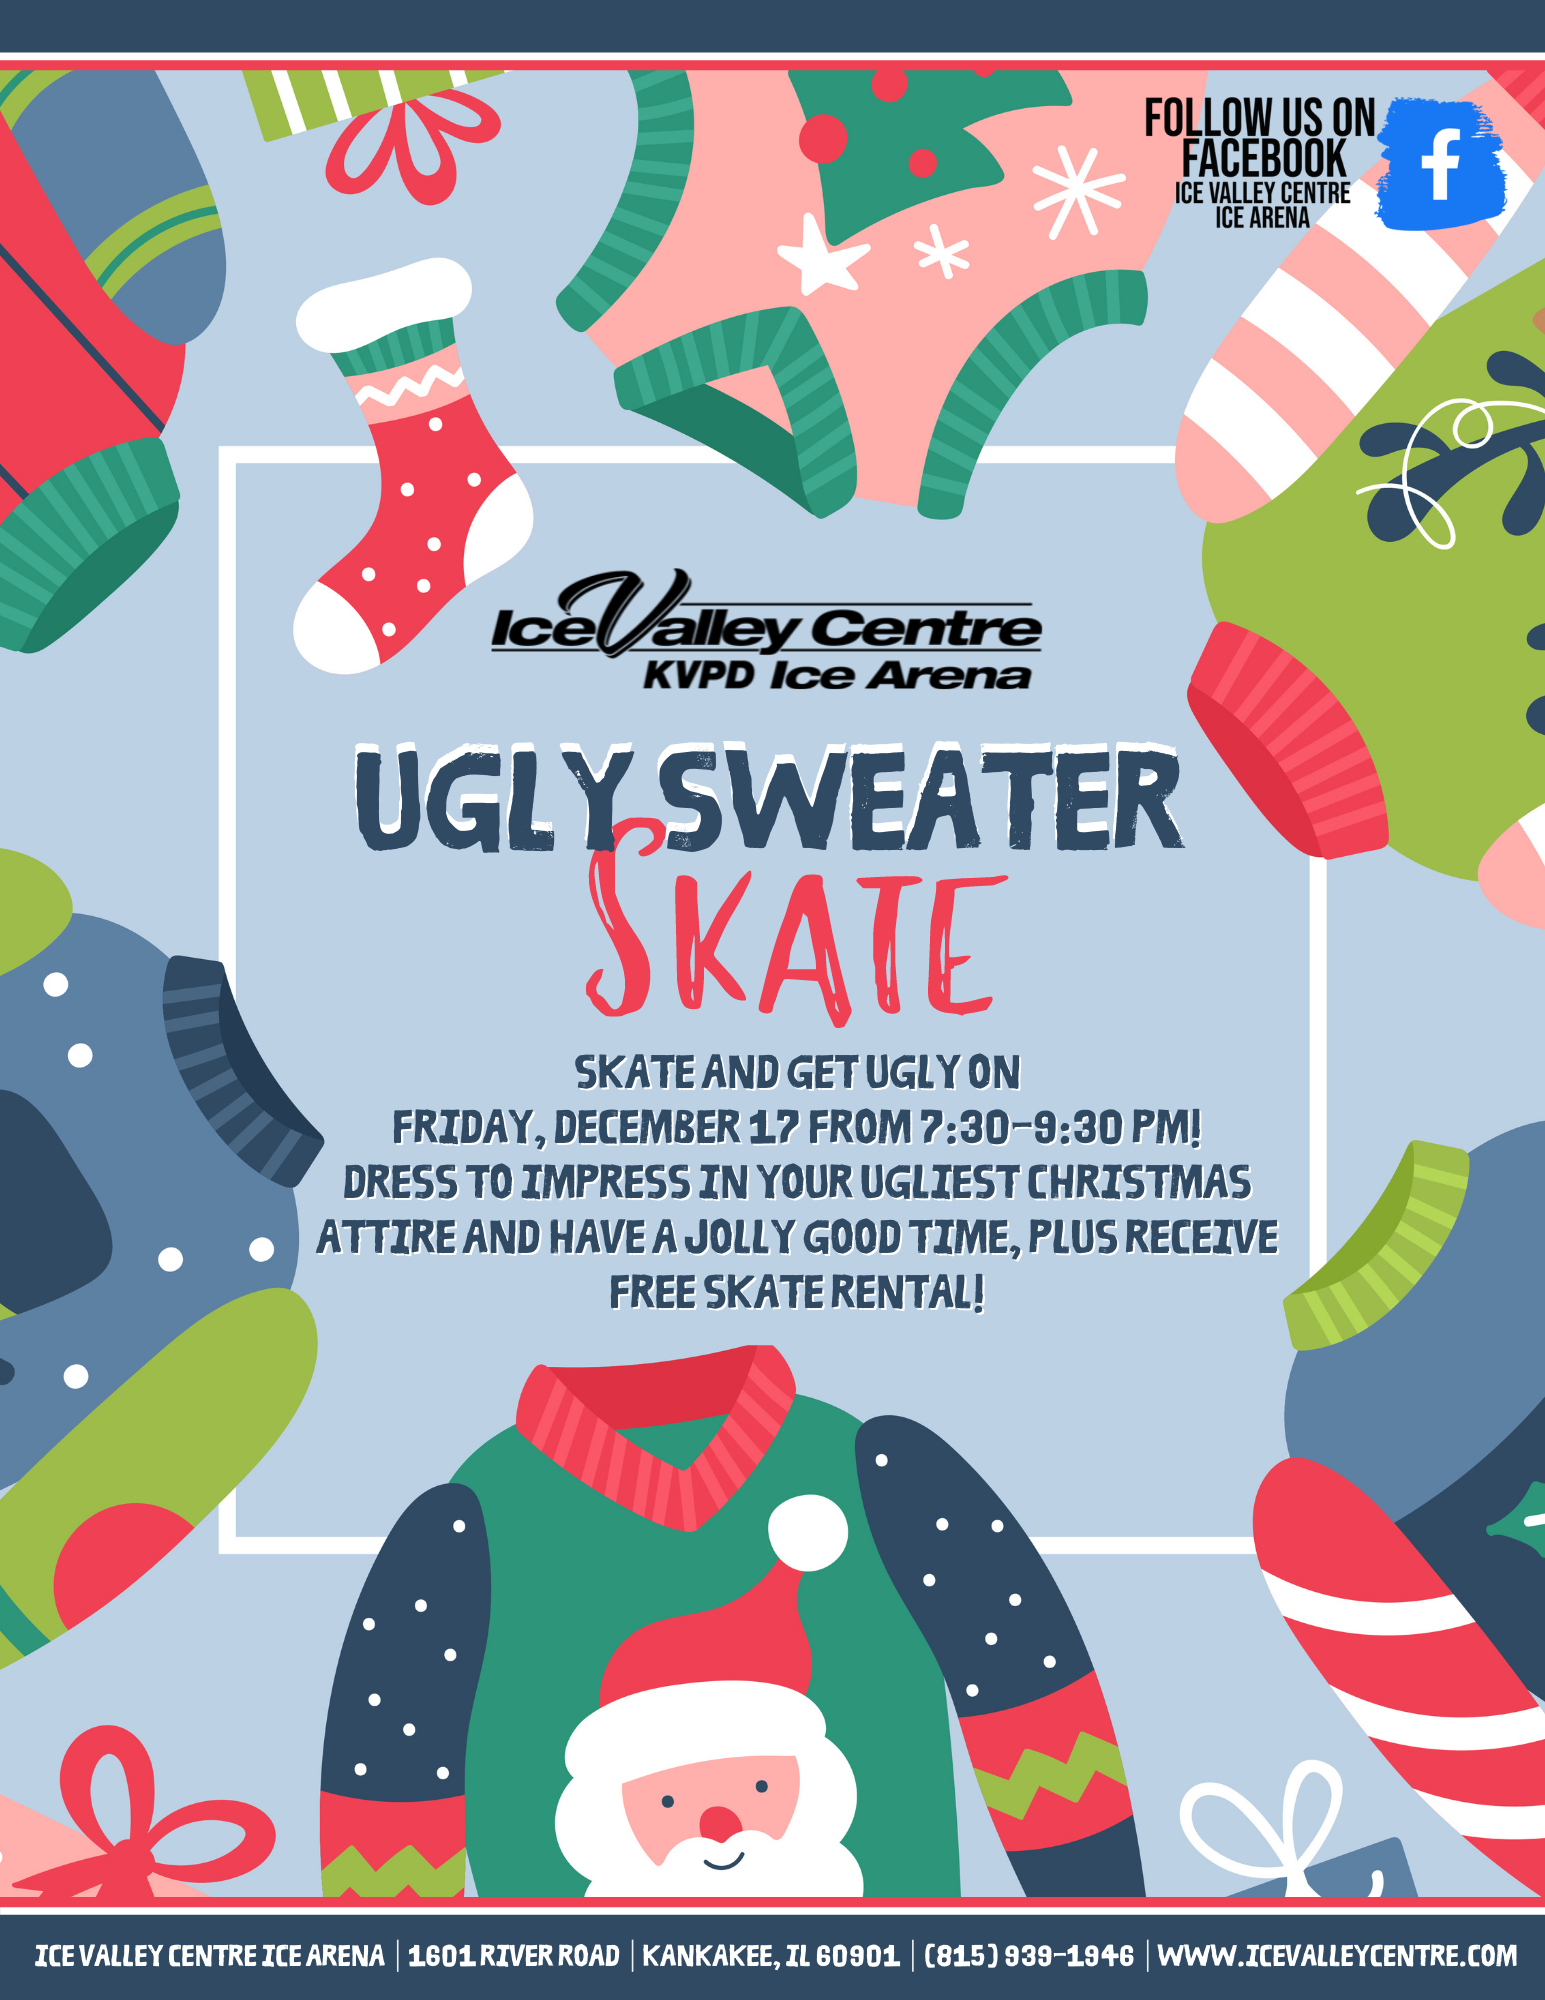 Ugly Sweater Skate